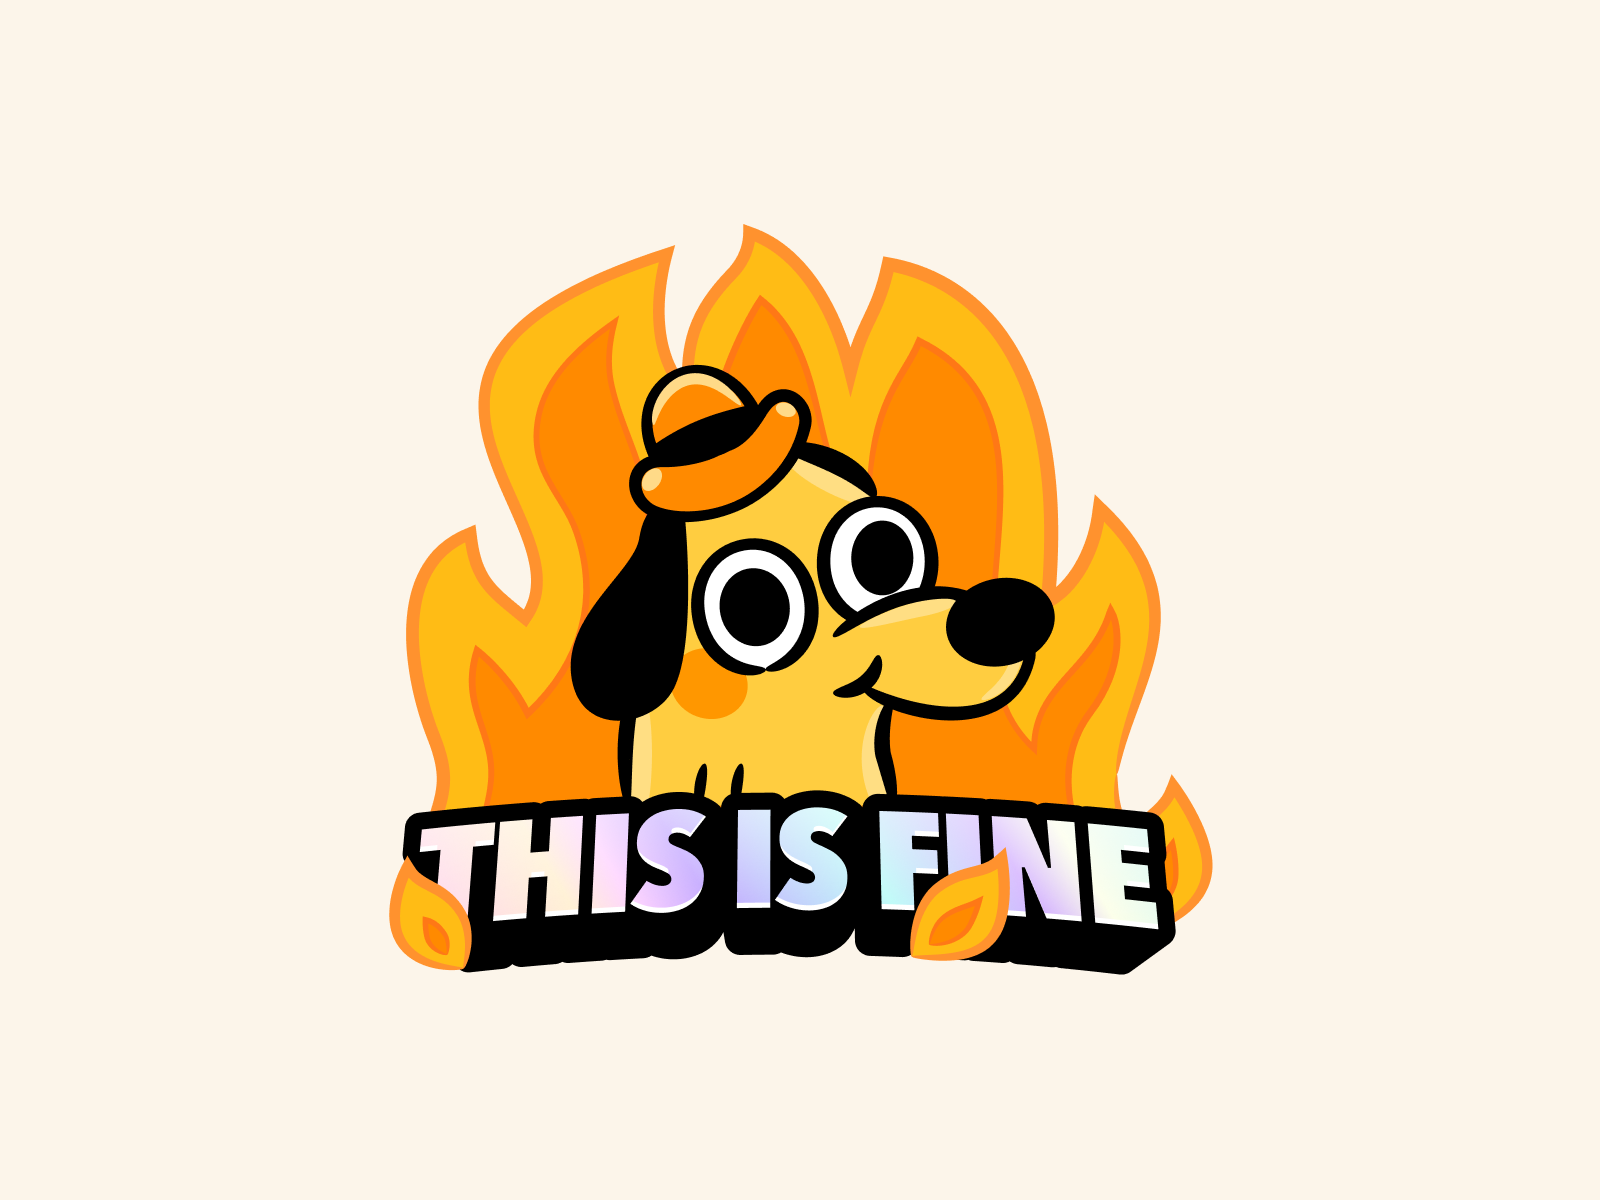 Aggregate 78+ this is fine wallpaper latest - in.cdgdbentre